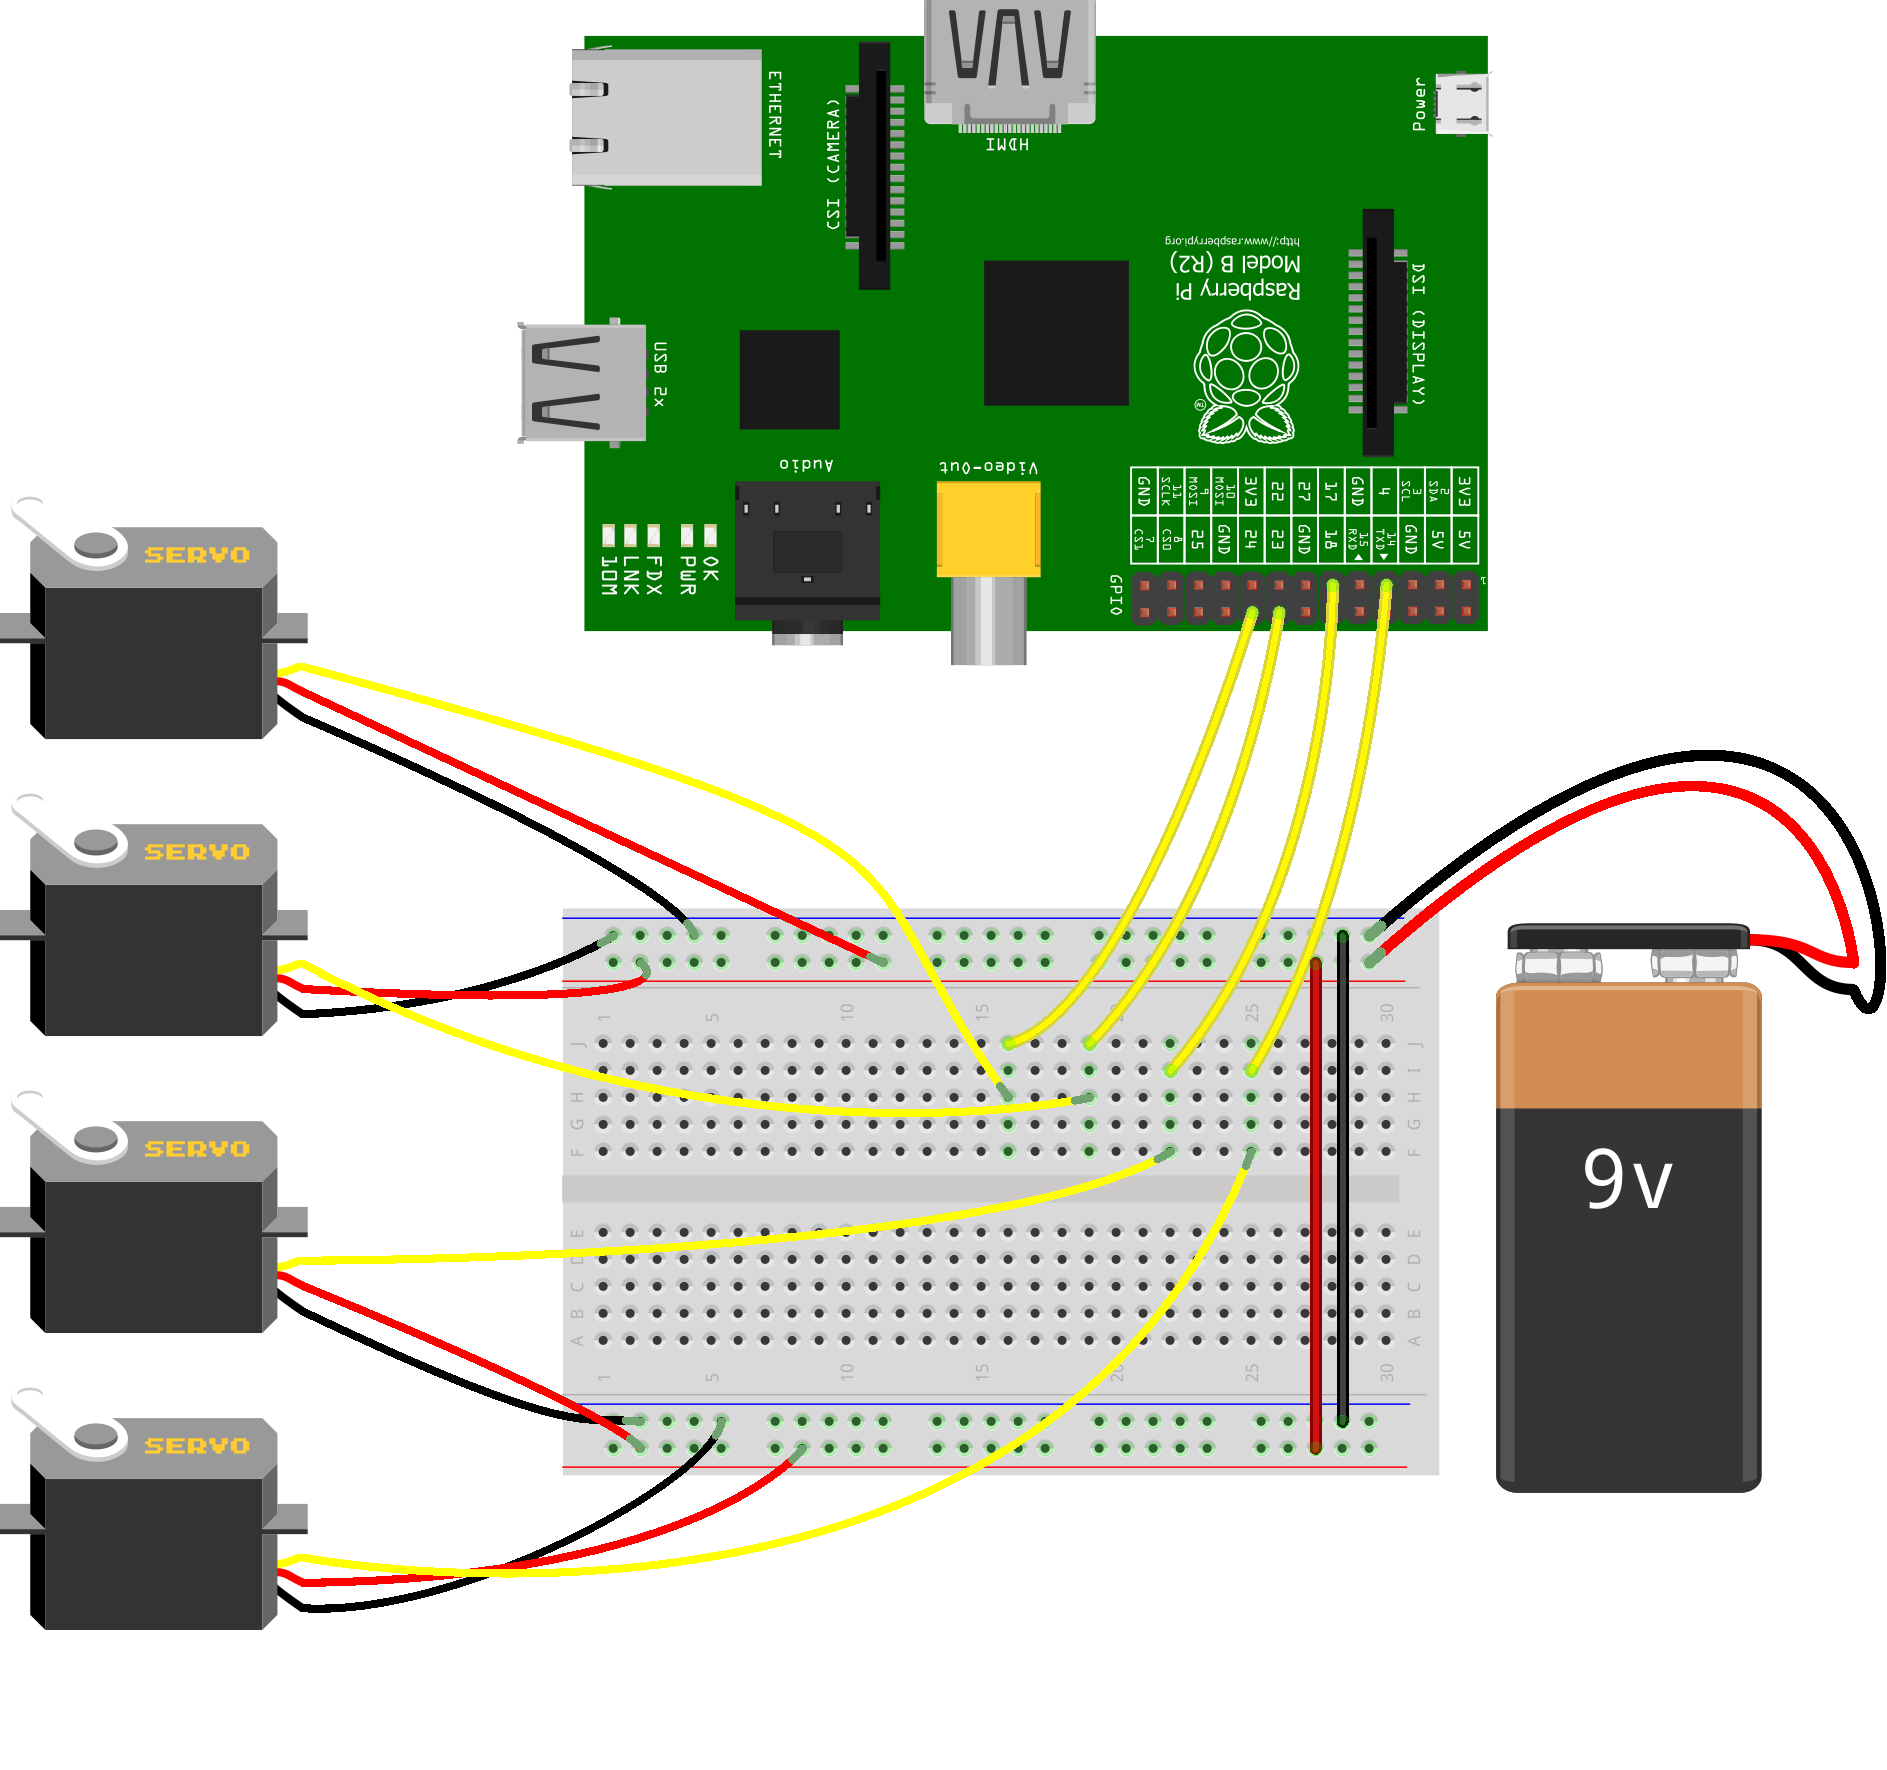 How to Use Servos on the Raspberry Pi